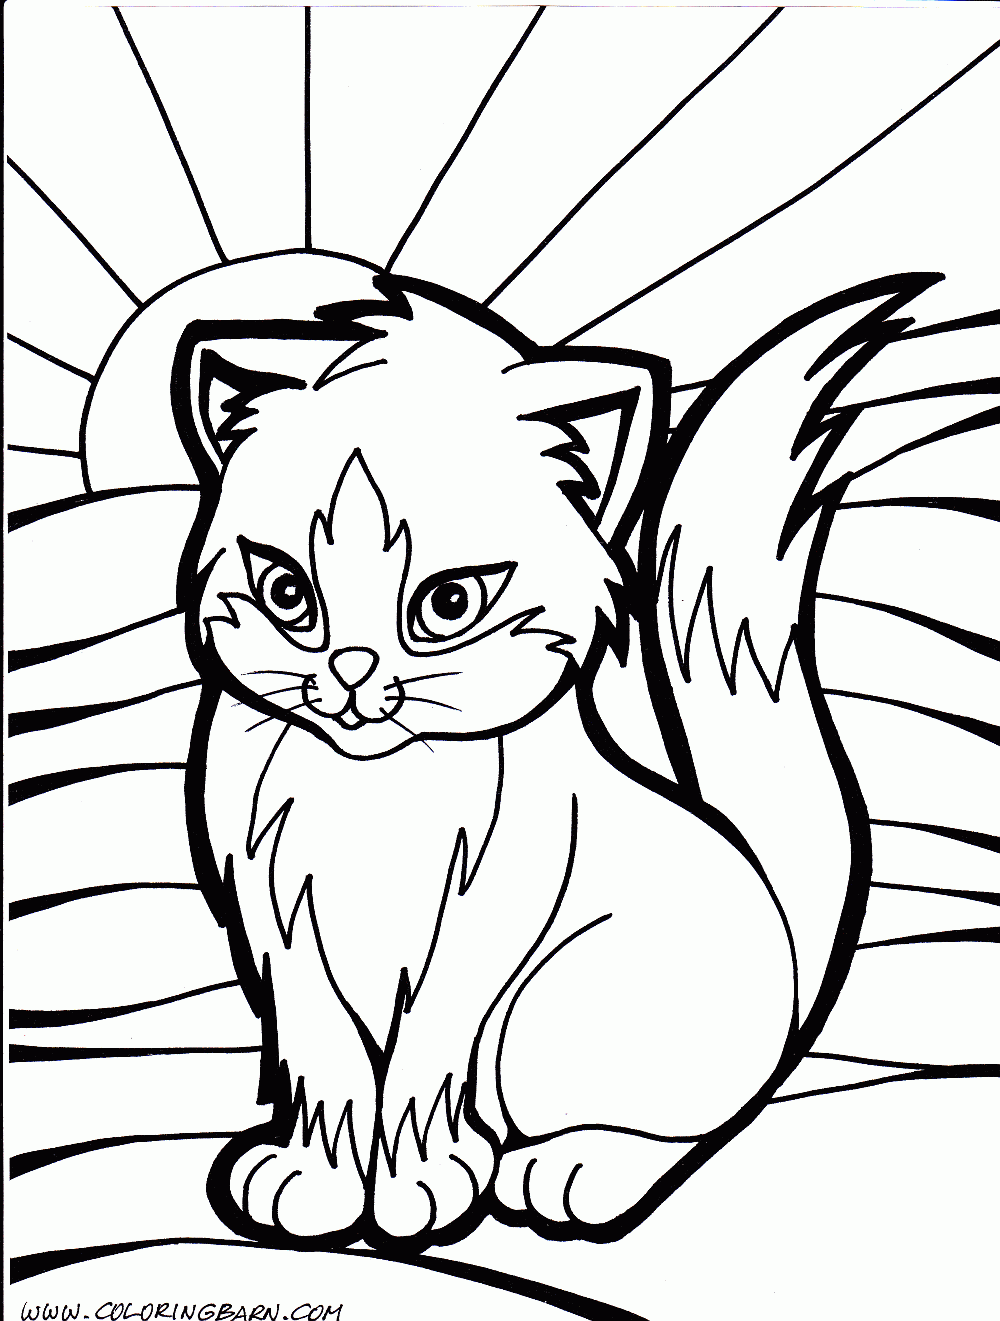 a-simple-free-printable-cat-coloring-sheet